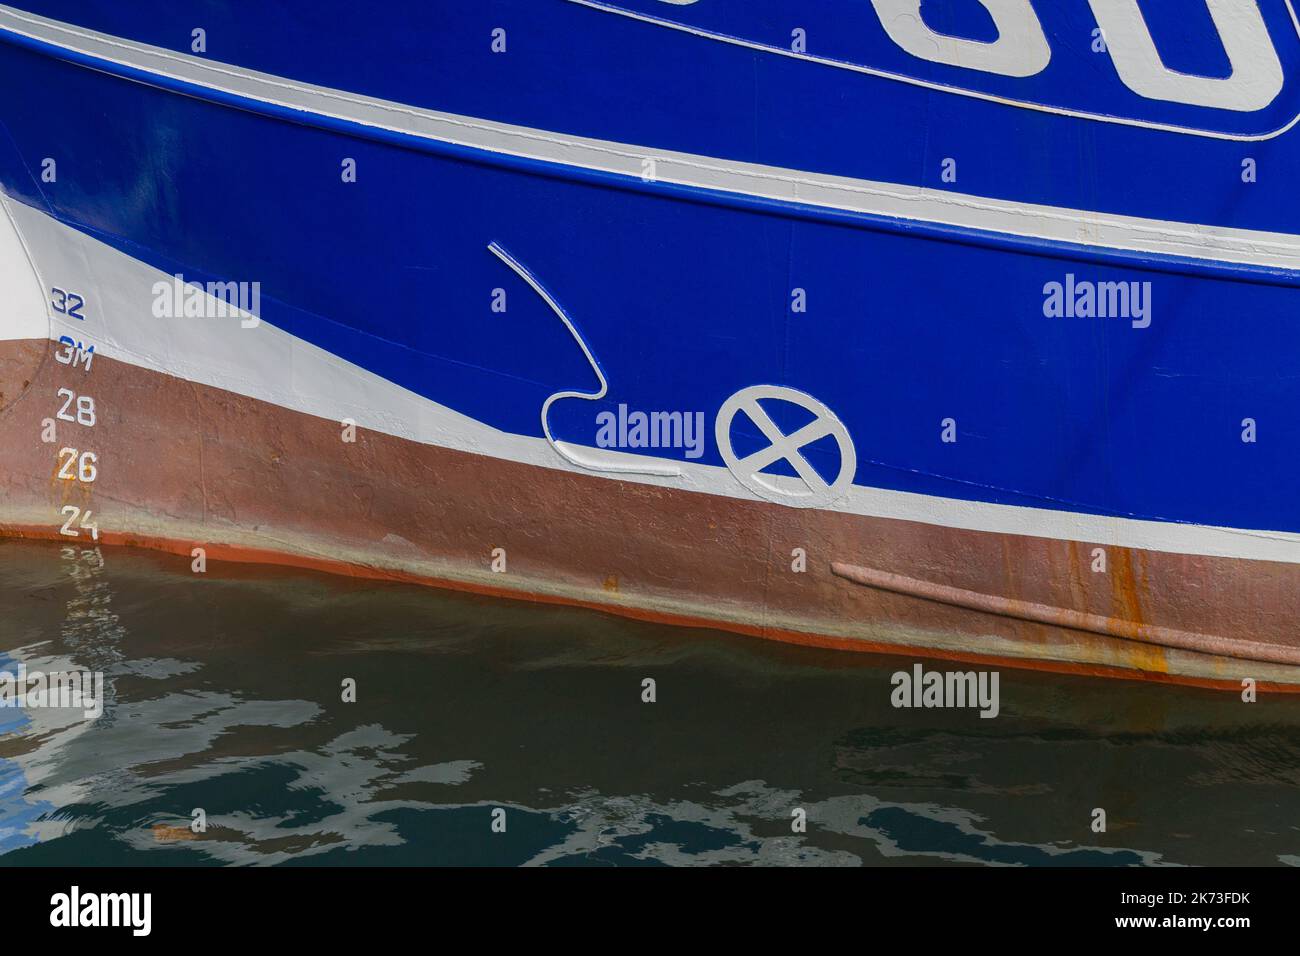 Bow thruster sign or symbol on ships hull Stock Photo